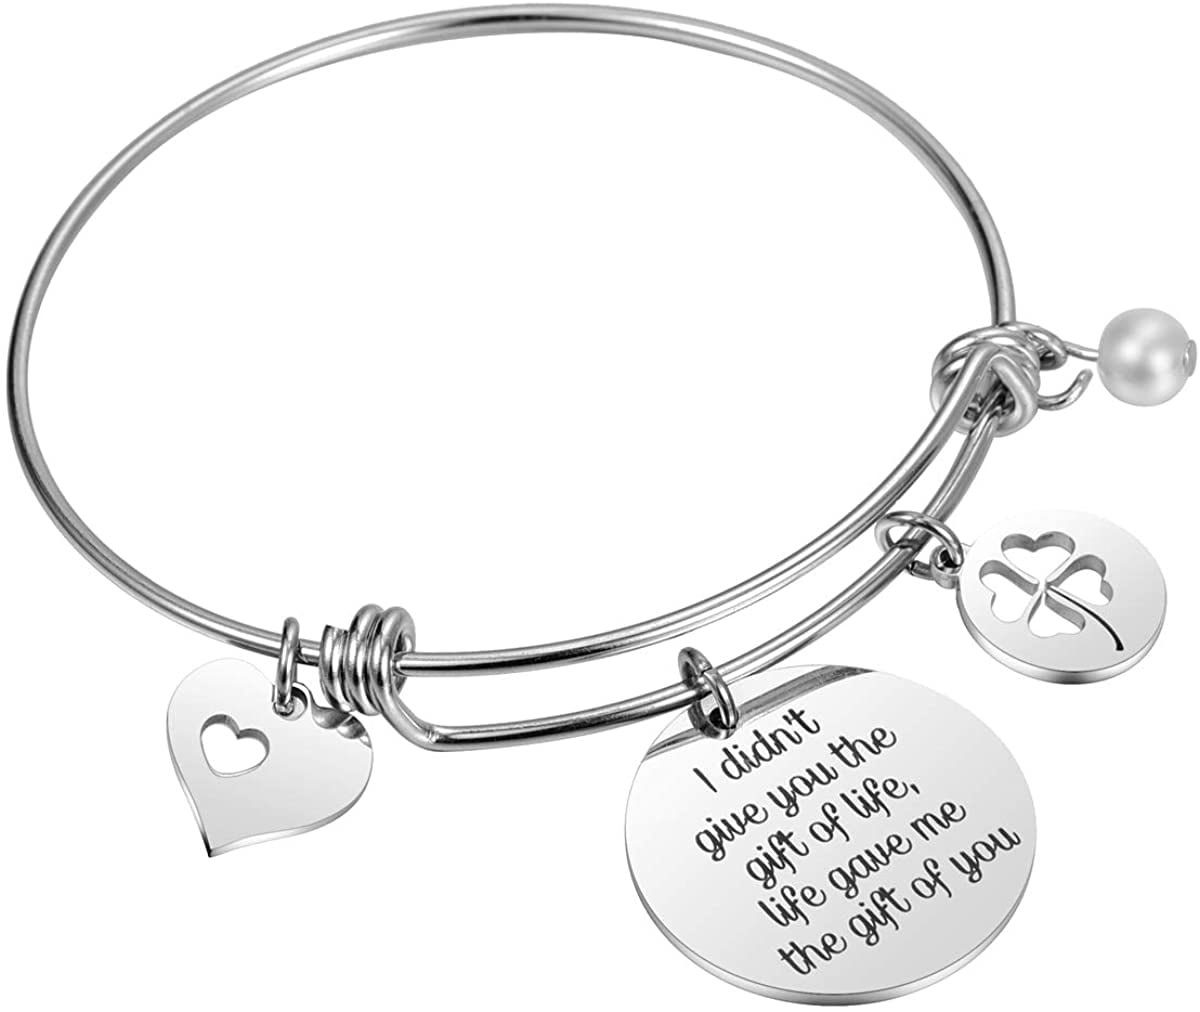 Stepdaughter Bracelet Bonus Daughter Jewelry Daughter in Law Gift I Didnt Give You The Gift of Life Life Gave Me The Gift of You Bracelet Stepdaughter Gift from Stepparents